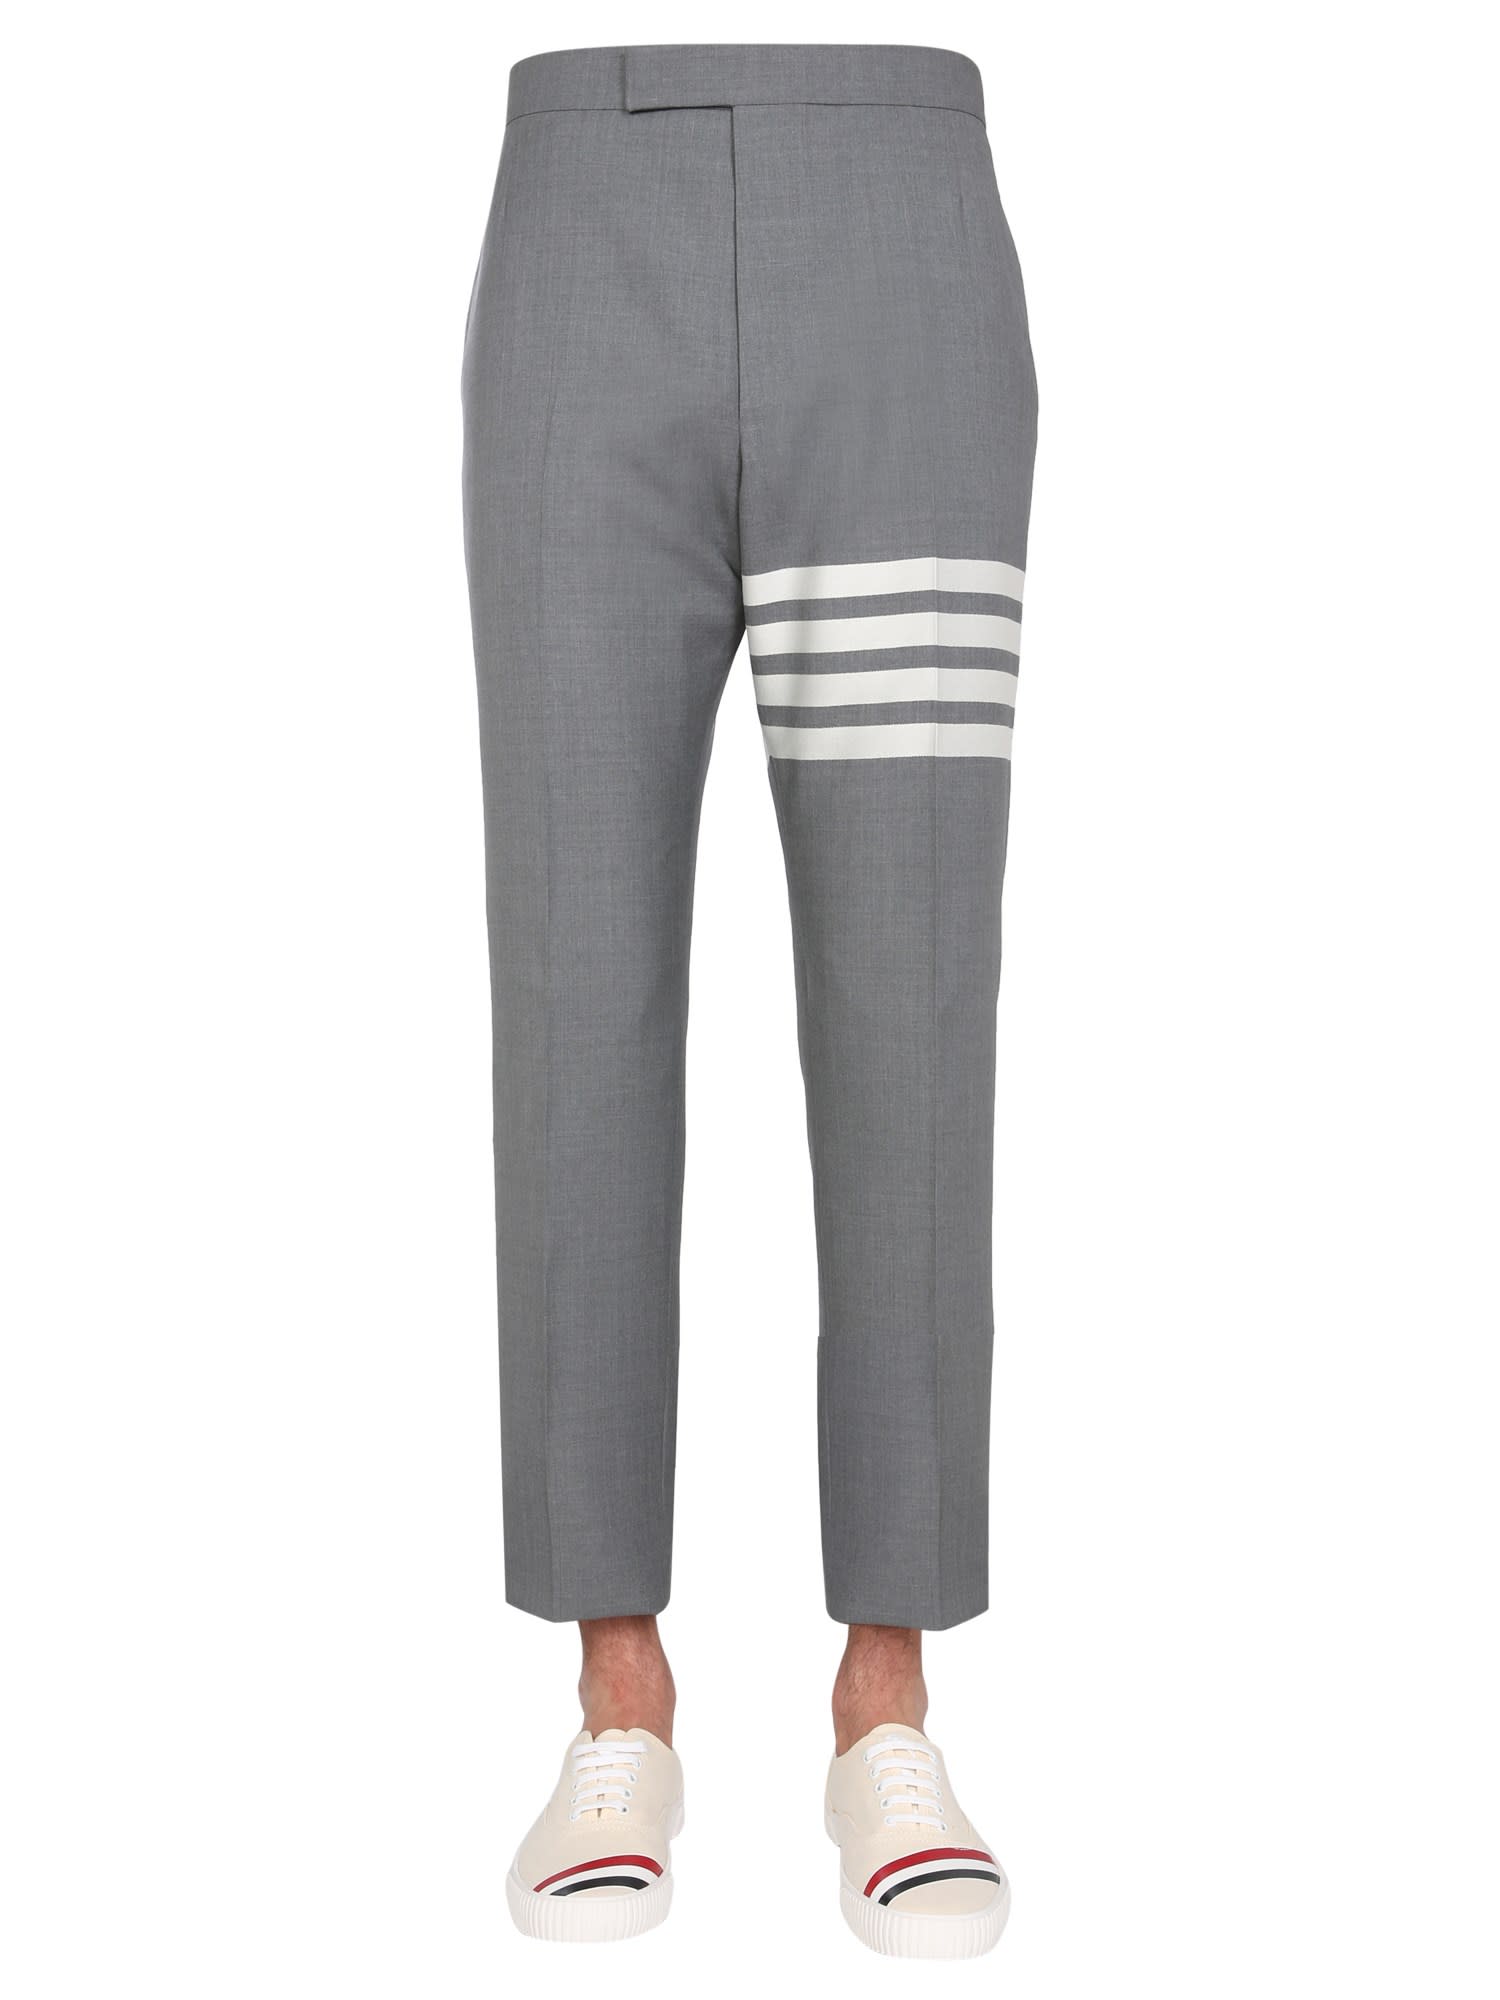 THOM BROWNE CLASSIC PANTS WITH MARTINGALE,MTC001A 06146035